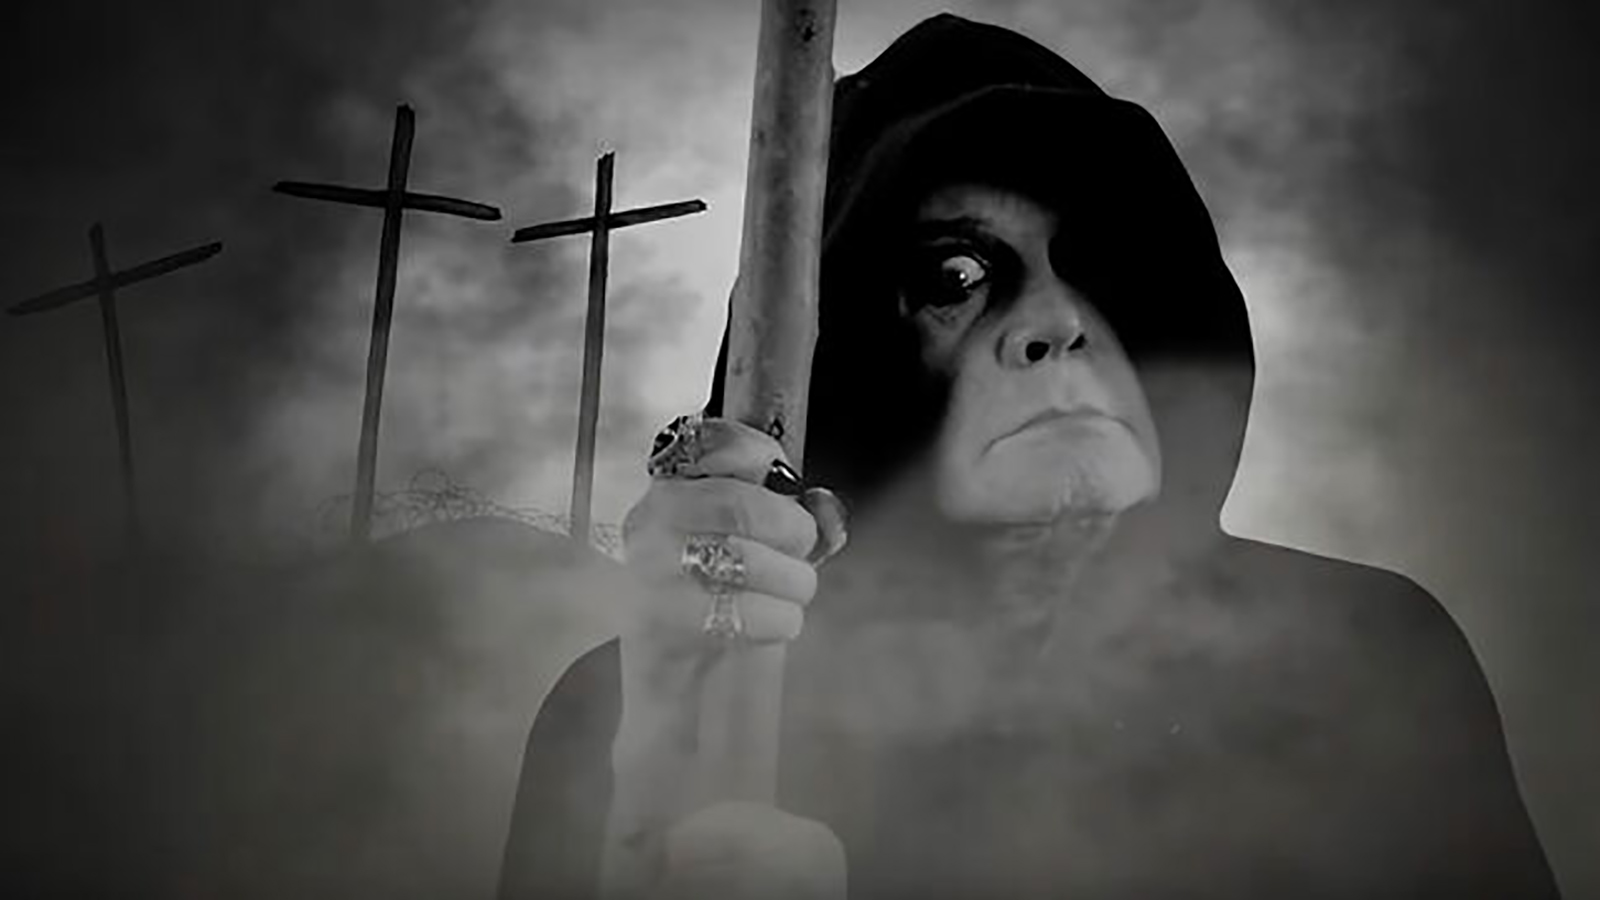 See Ozzy Osbourne's Deranged New Video for 